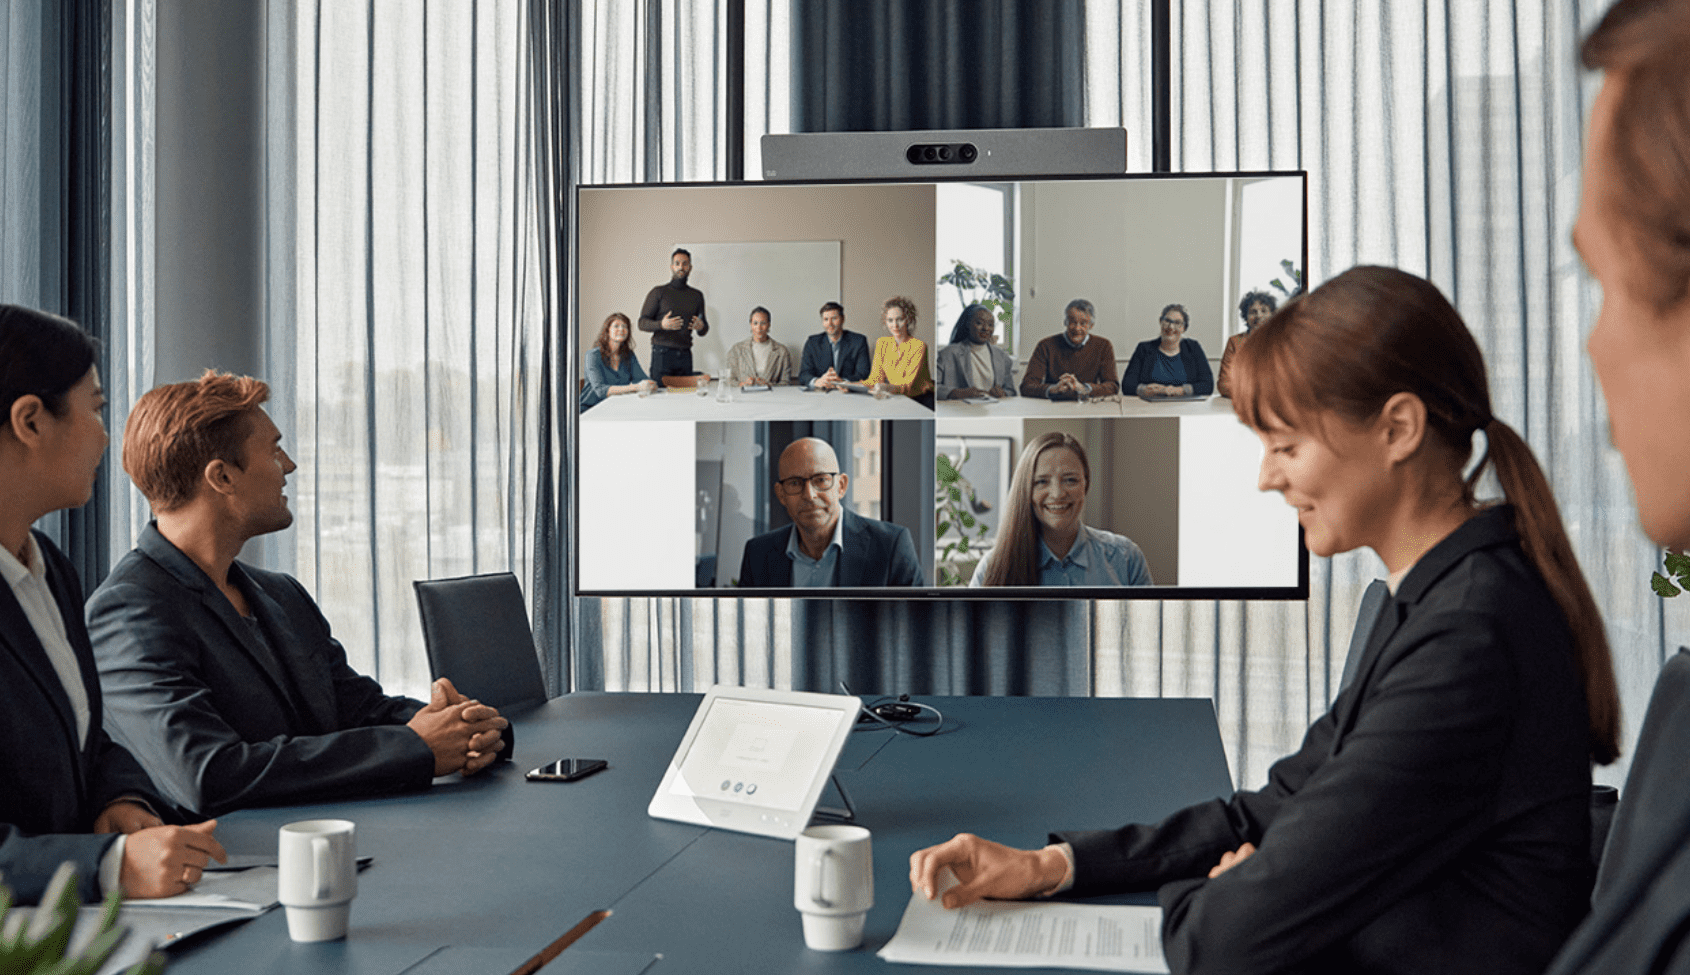 Hybrid meeting space with Pexip AV and UCC technology